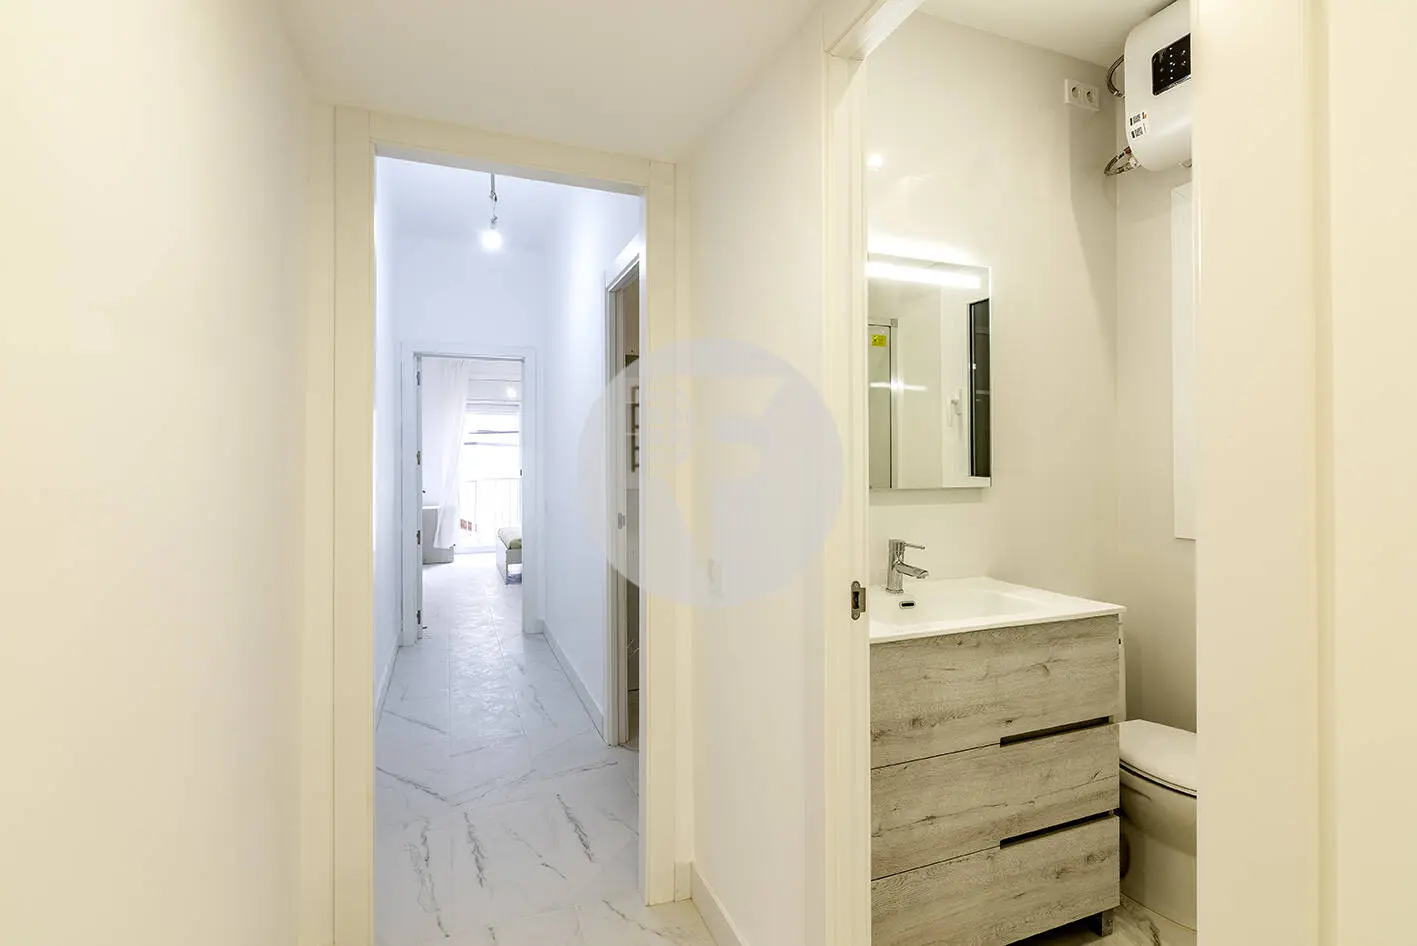 Brand new completely renovated apartment on Aragó street in the heart of El Clot in Barcelona. 22